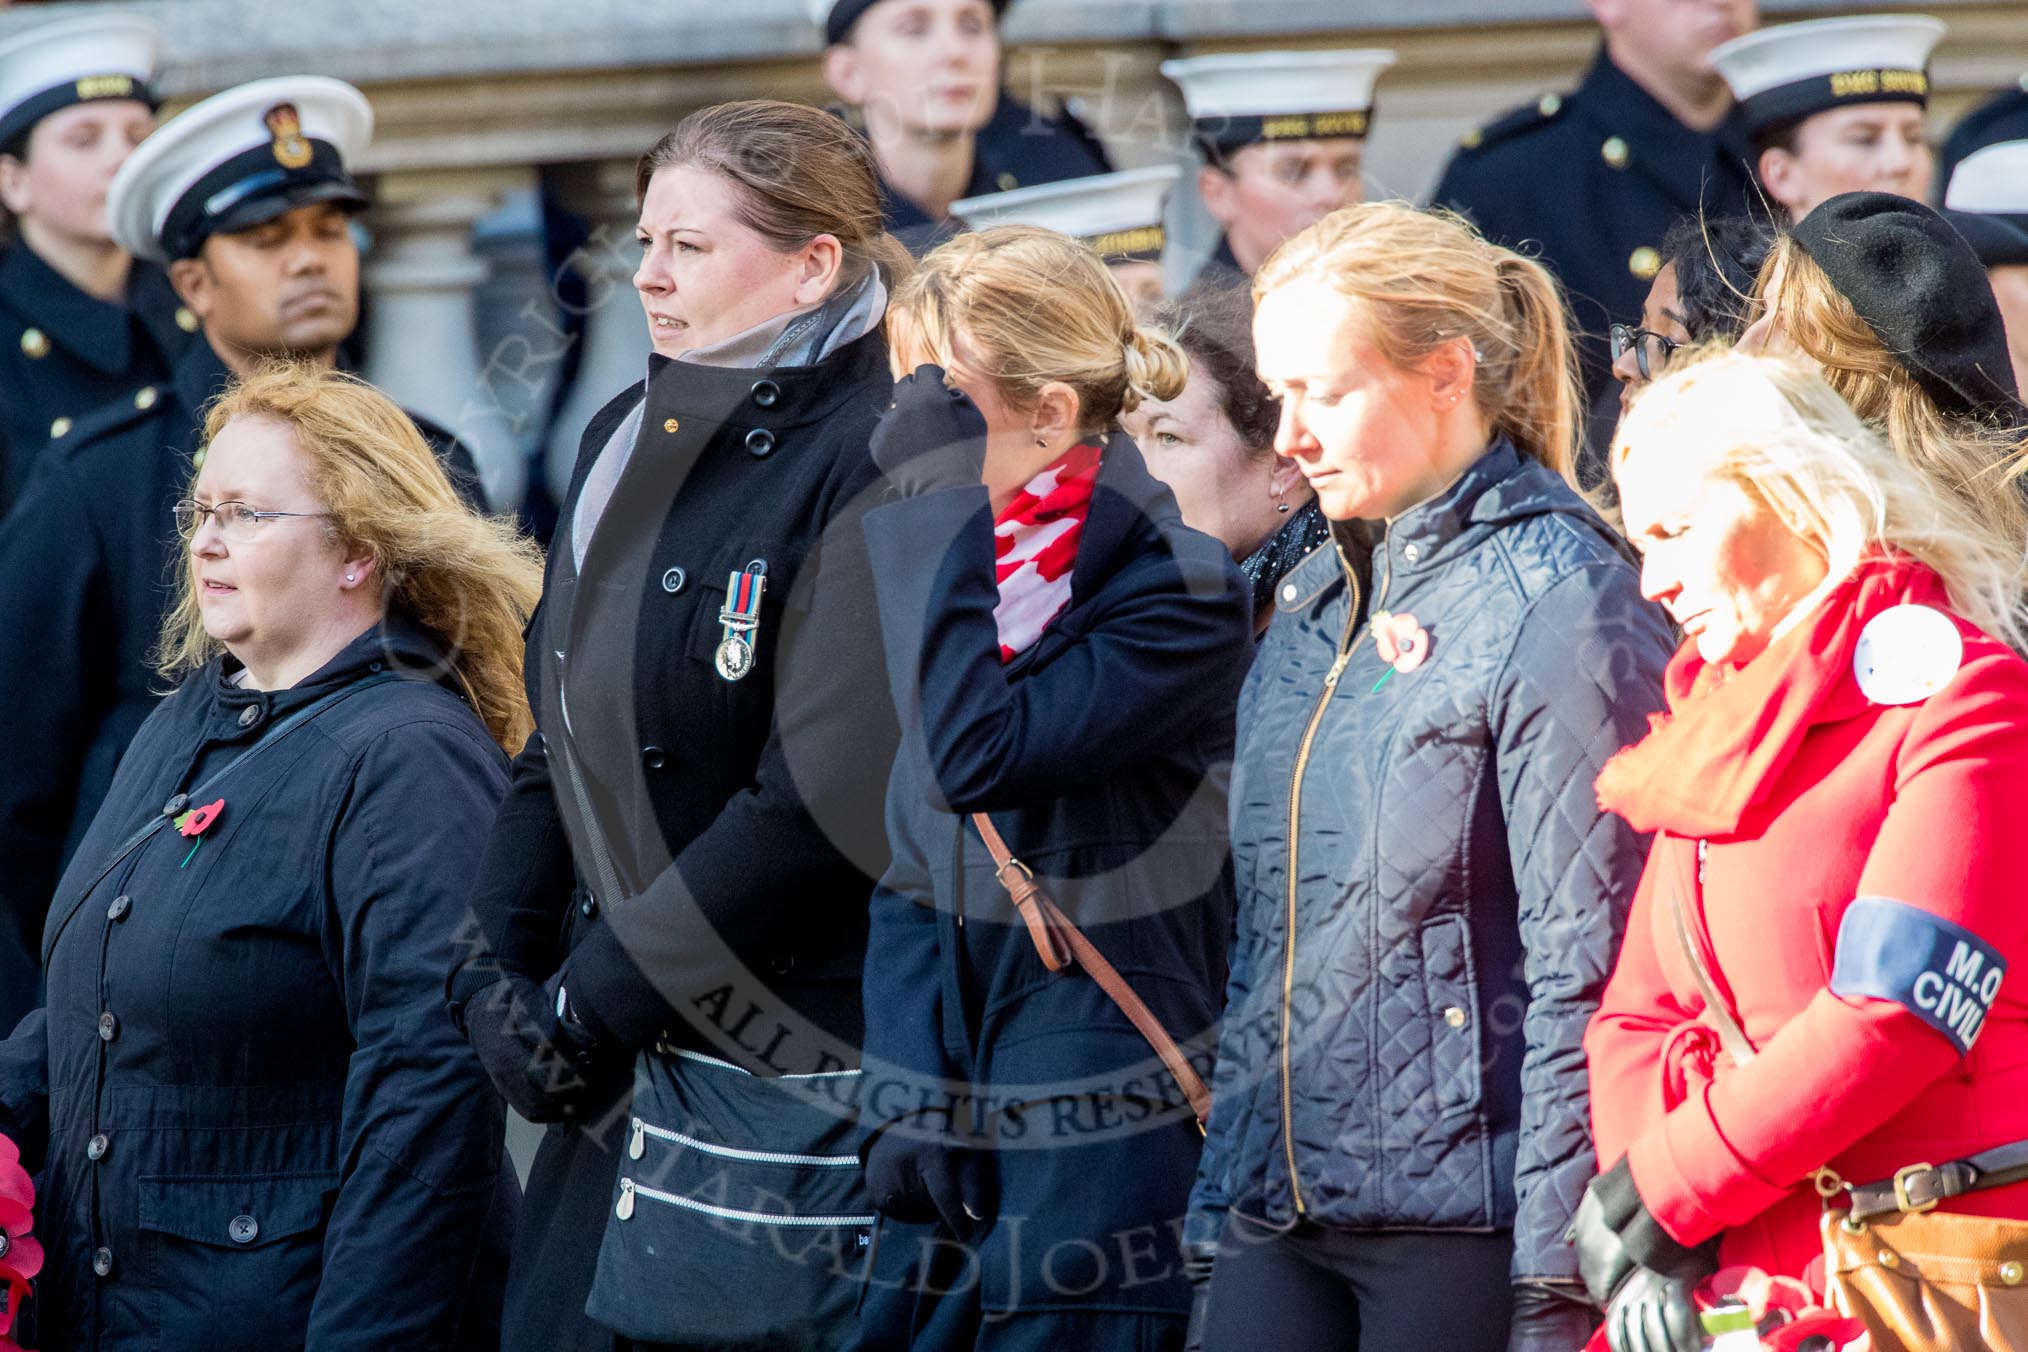 MOD Civilians (Group M26, 17 members) during the Royal British Legion March Past on Remembrance Sunday at the Cenotaph, Whitehall, Westminster, London, 11 November 2018, 12:28.